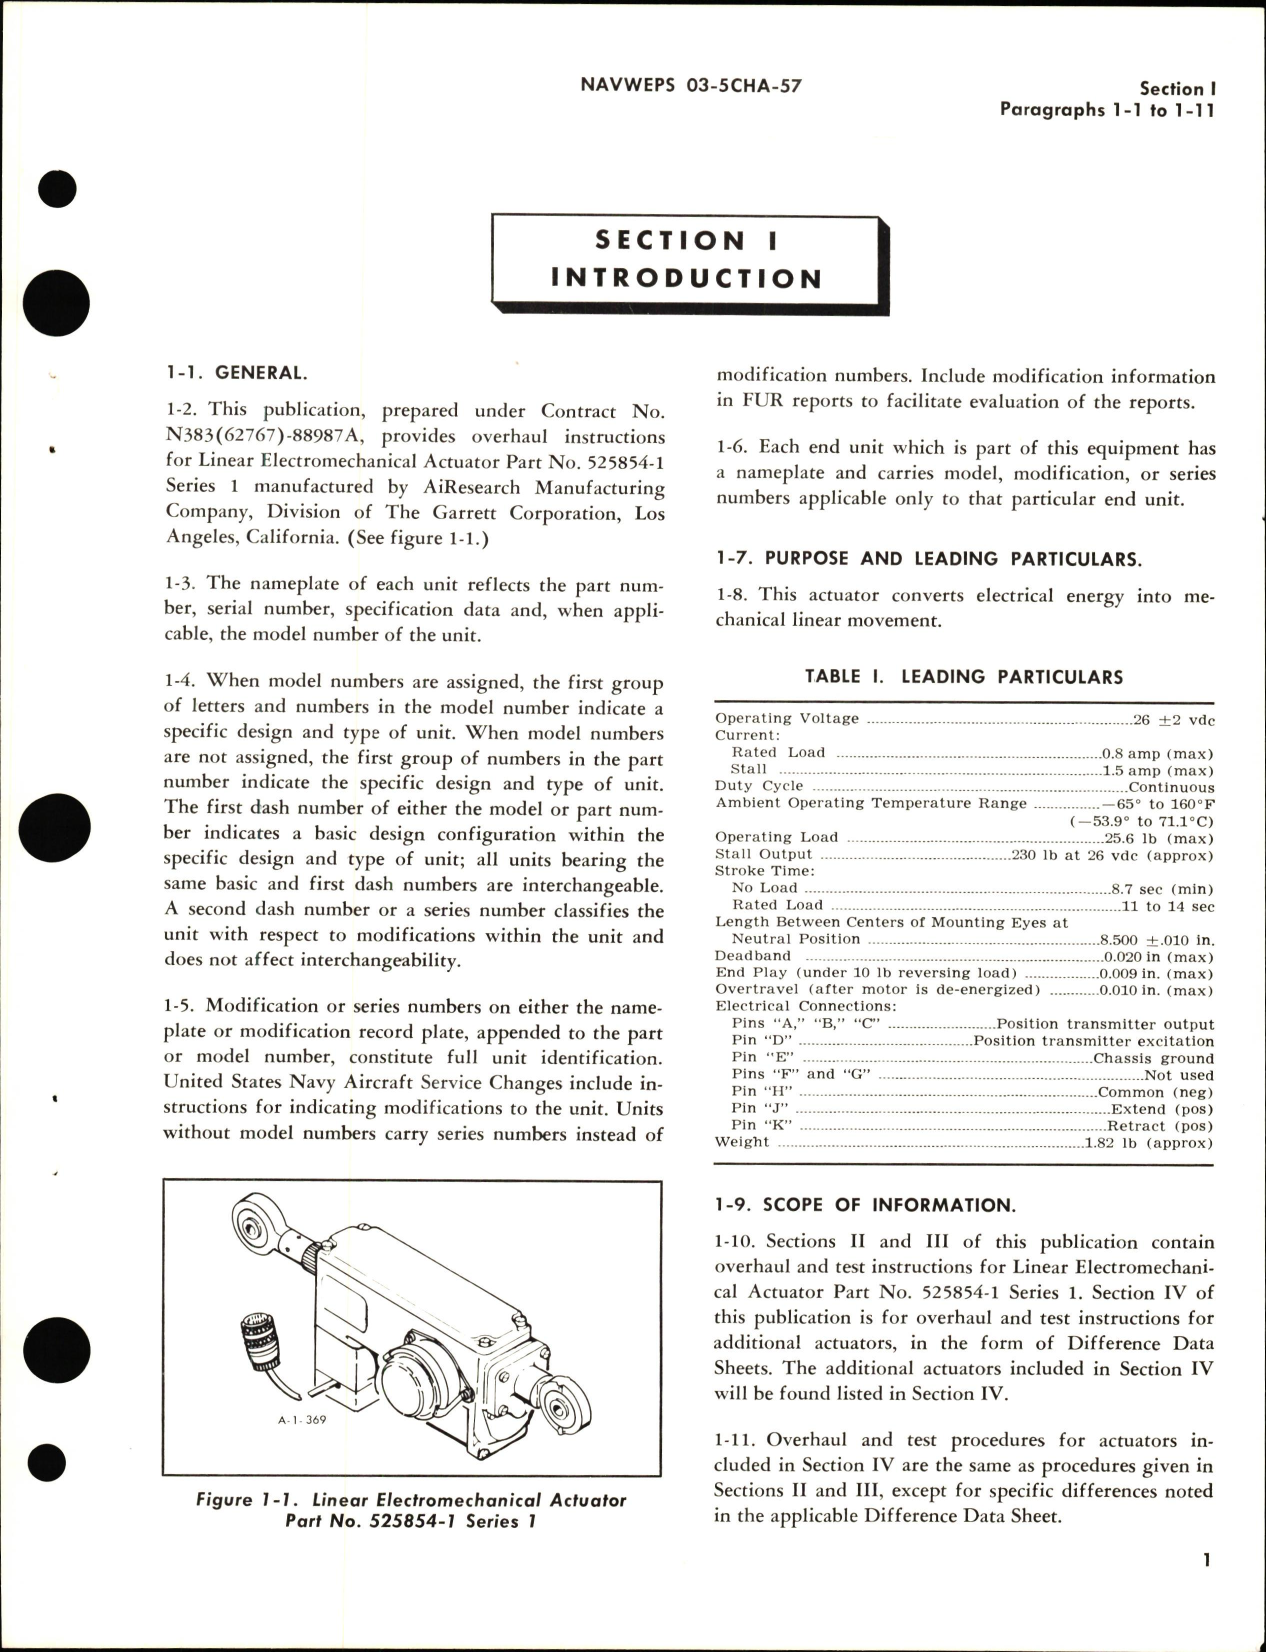 Sample page 5 from AirCorps Library document: Overhaul Instructions for Linear Electromechanical Actuator - Part 525854-1